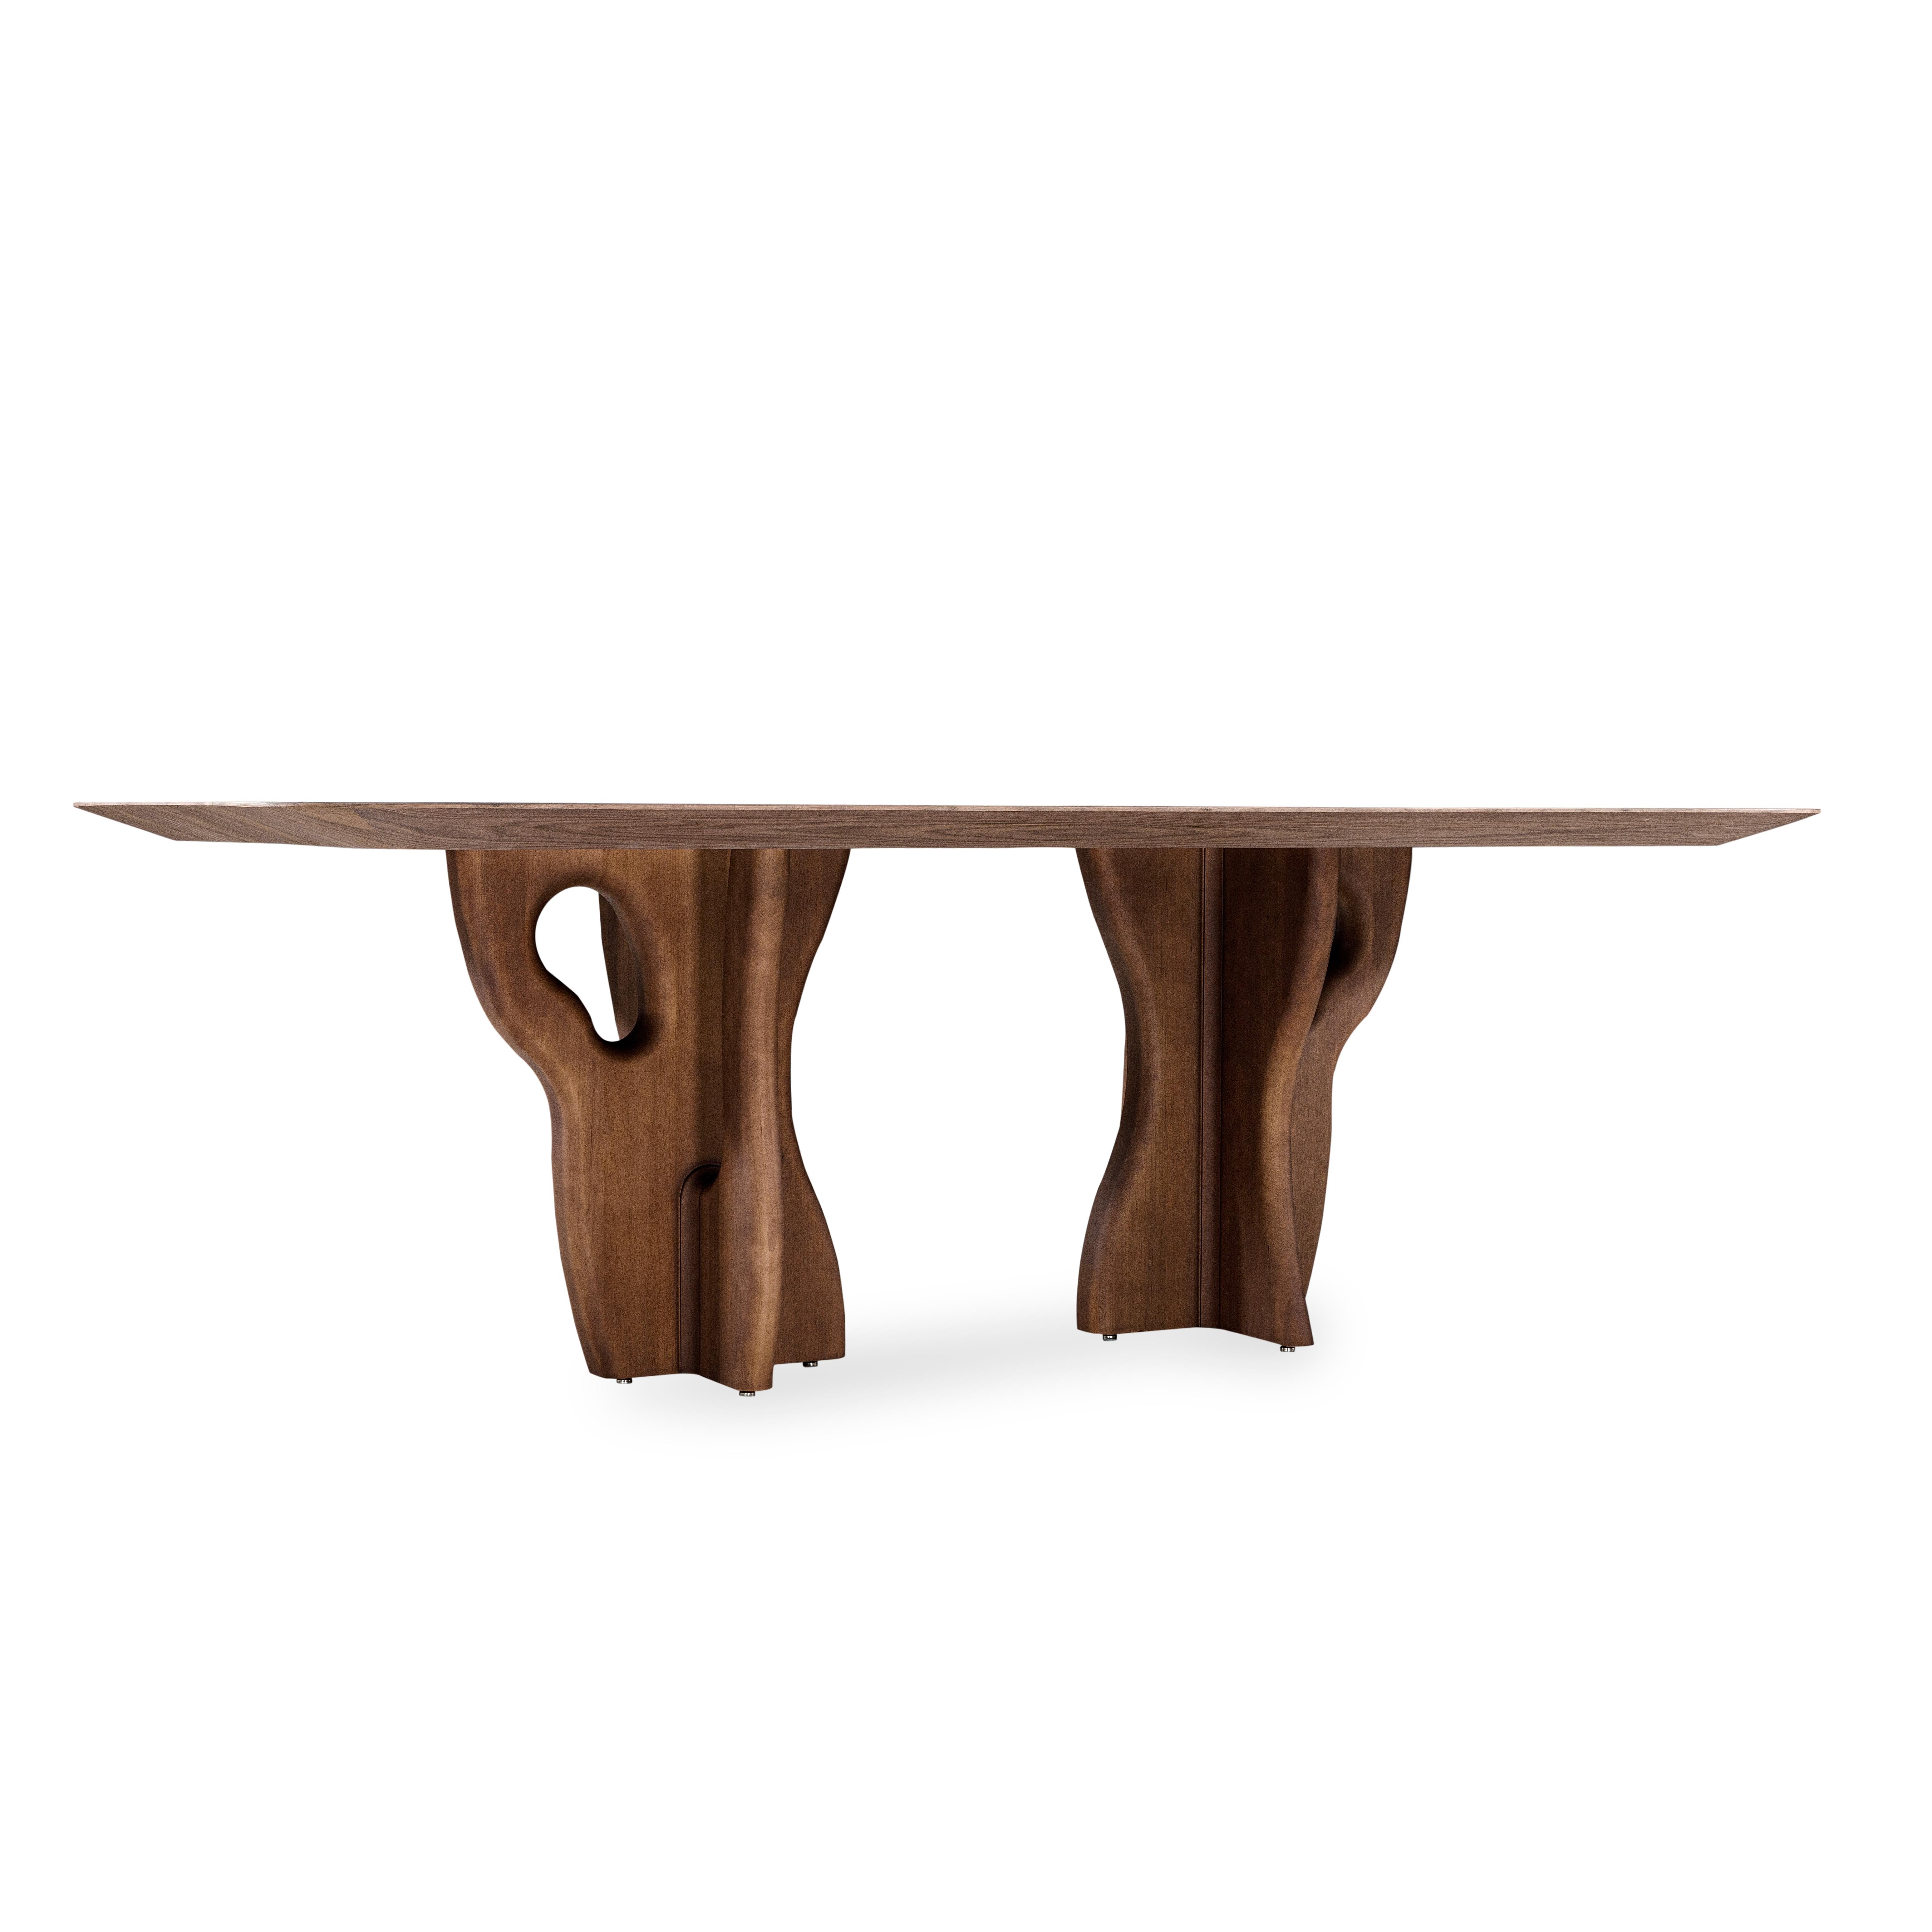 Brazilian Suma Dining Table with Walnut Veneered Top and Organic Solid Wood Legs 86'' For Sale